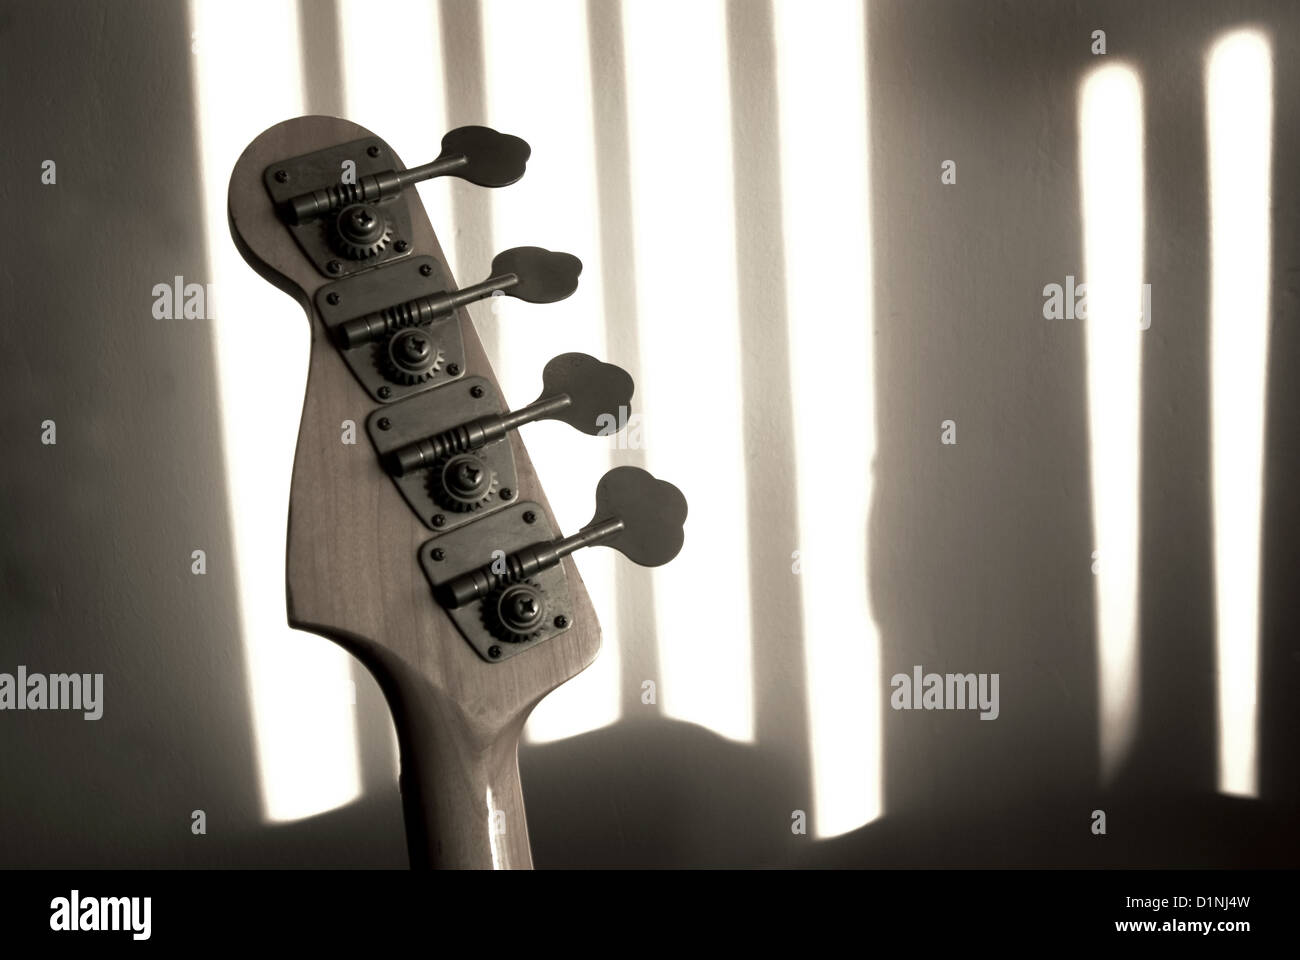 Bass guitar tuning head stock with shadows (music,jazz,blues,funk,rock concept) Stock Photo